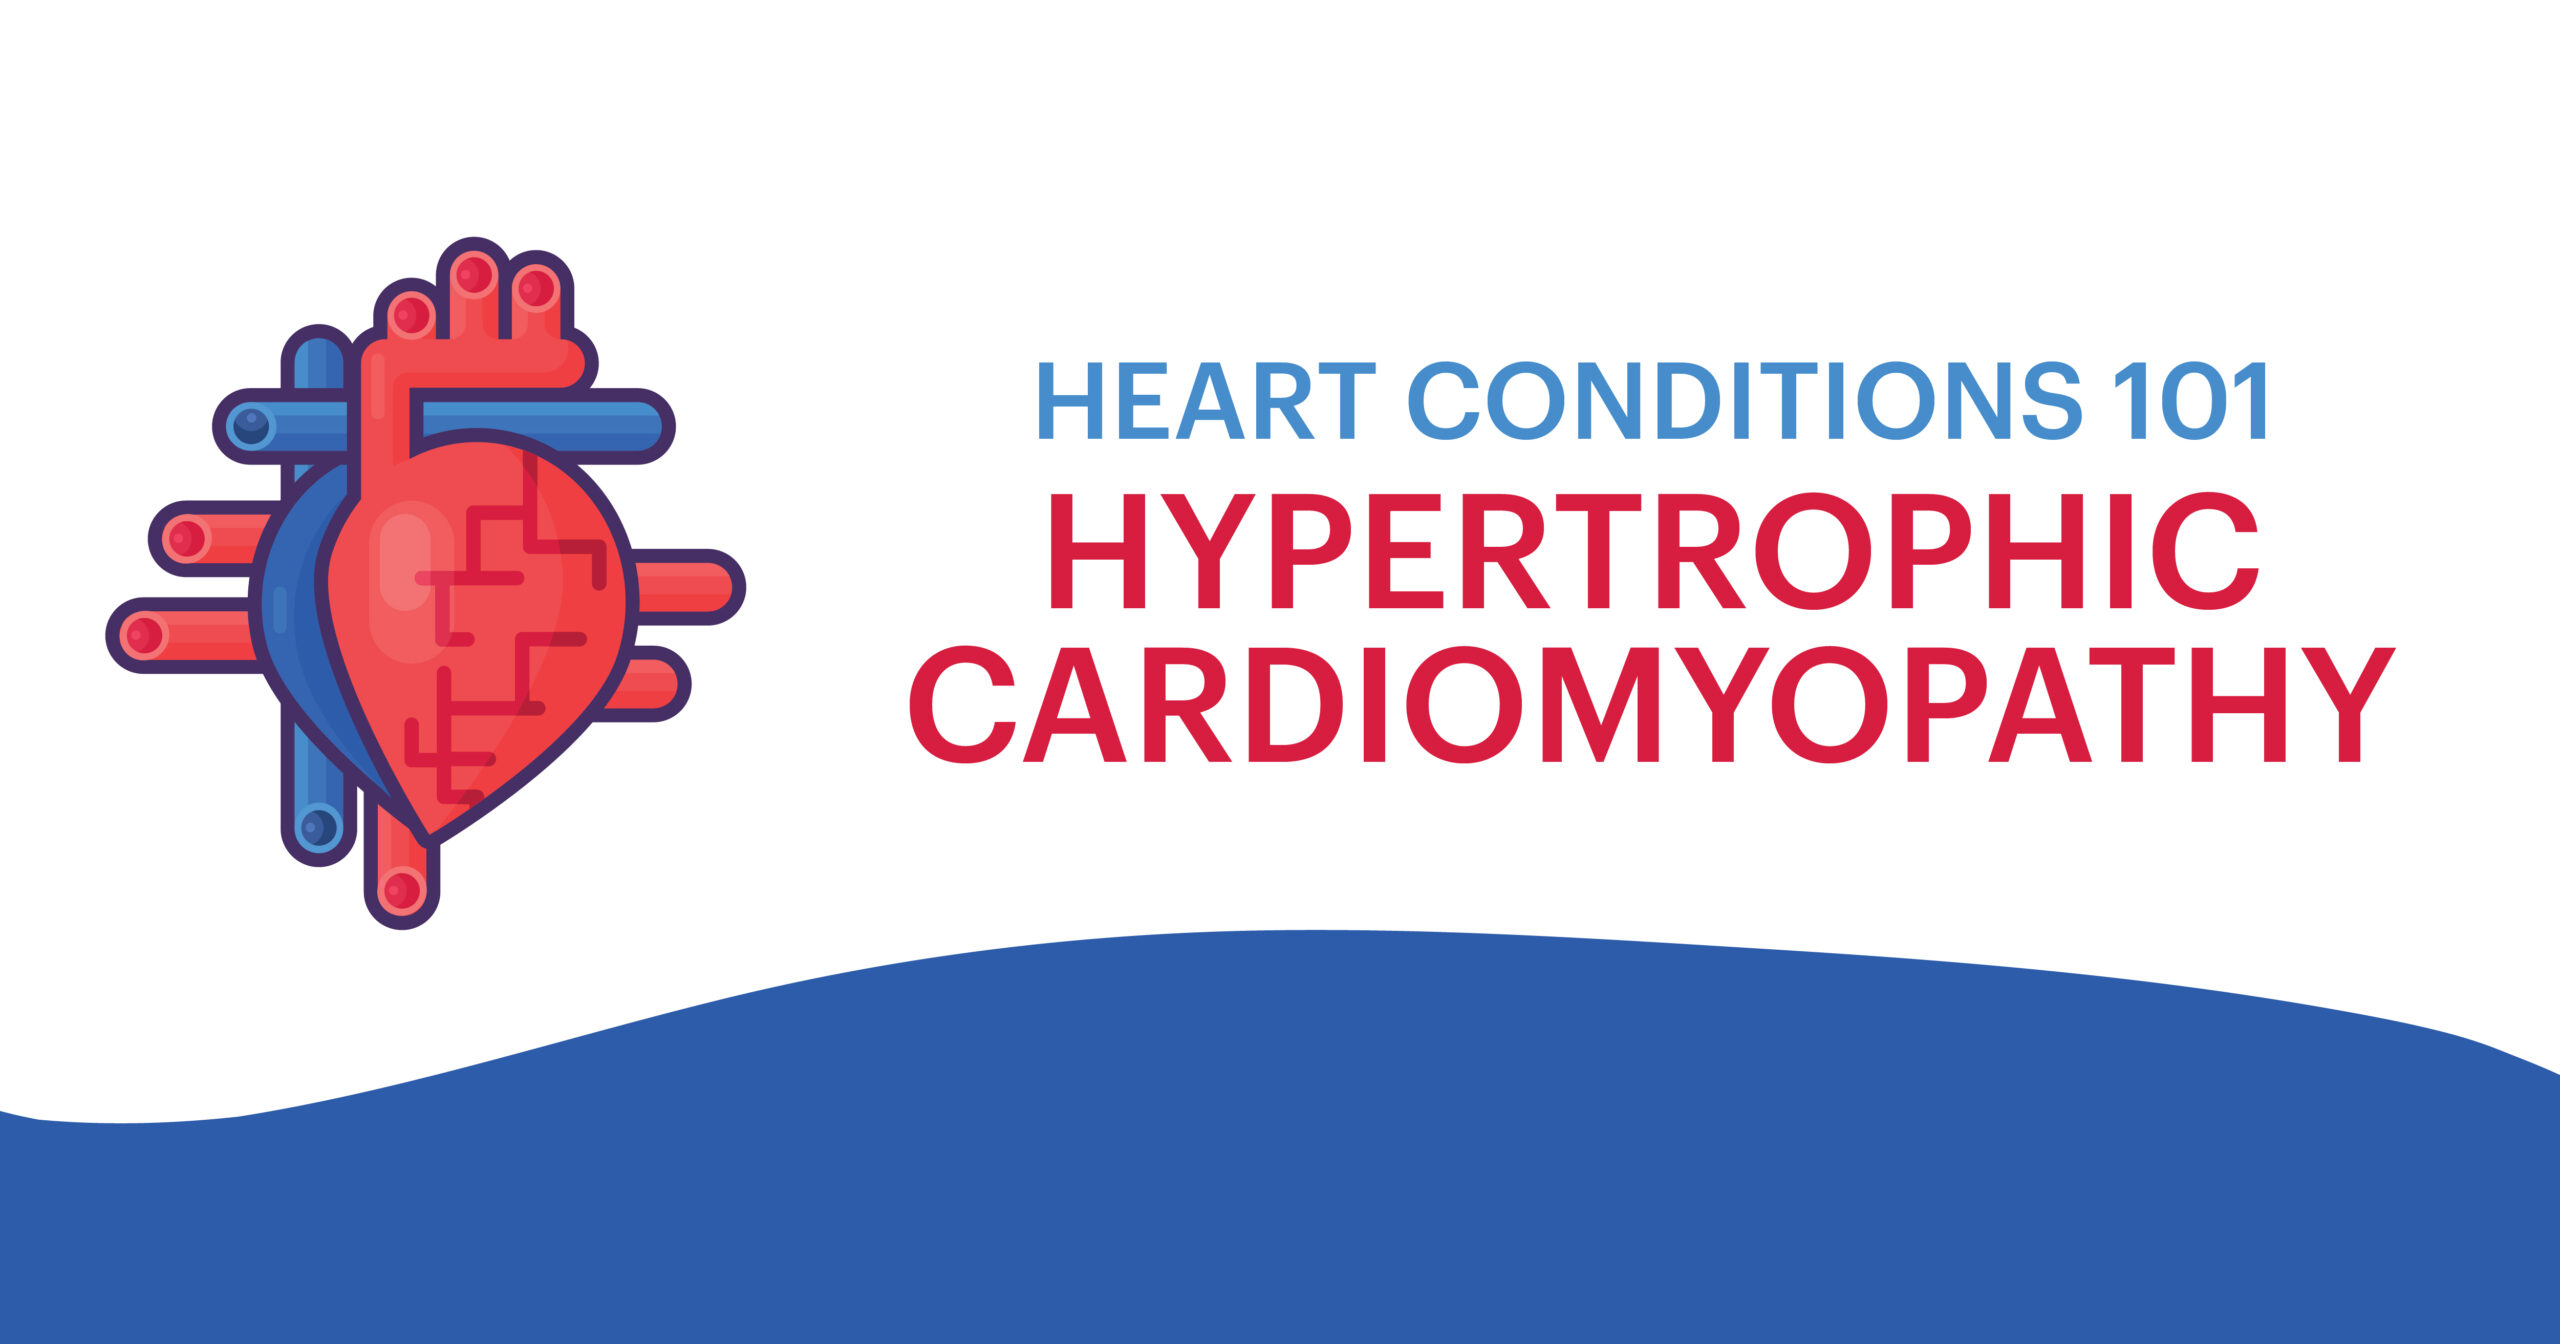 Heart Conditions 101: Hypertrophic Cardiomyopathy